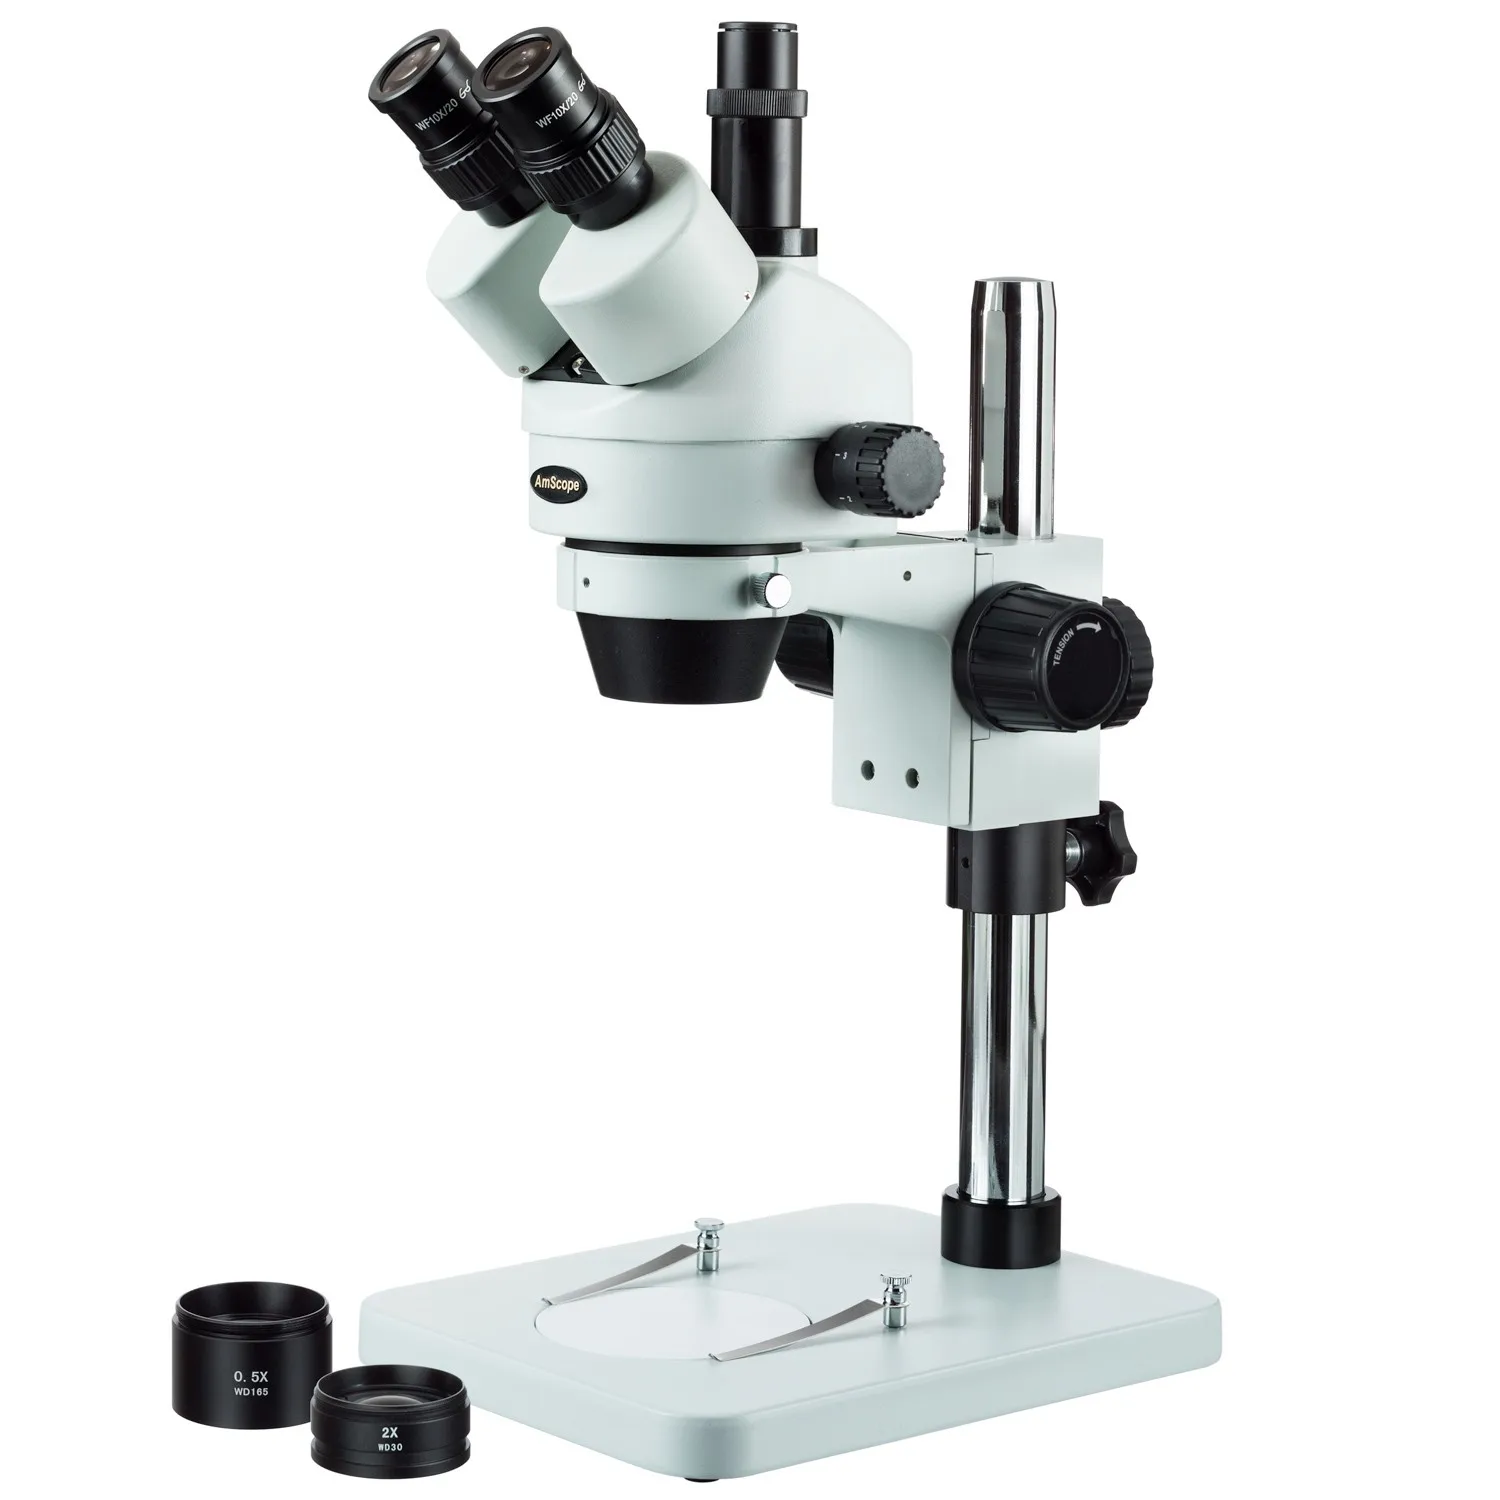 0.7-4.5X Zoom Objective 3.5X-90X Magnification Trinocular Stereo Microscope with Table Pillar Stand WF10X/20 Eyepieces Includes 0.5X and 2.0X Barlow Lens 